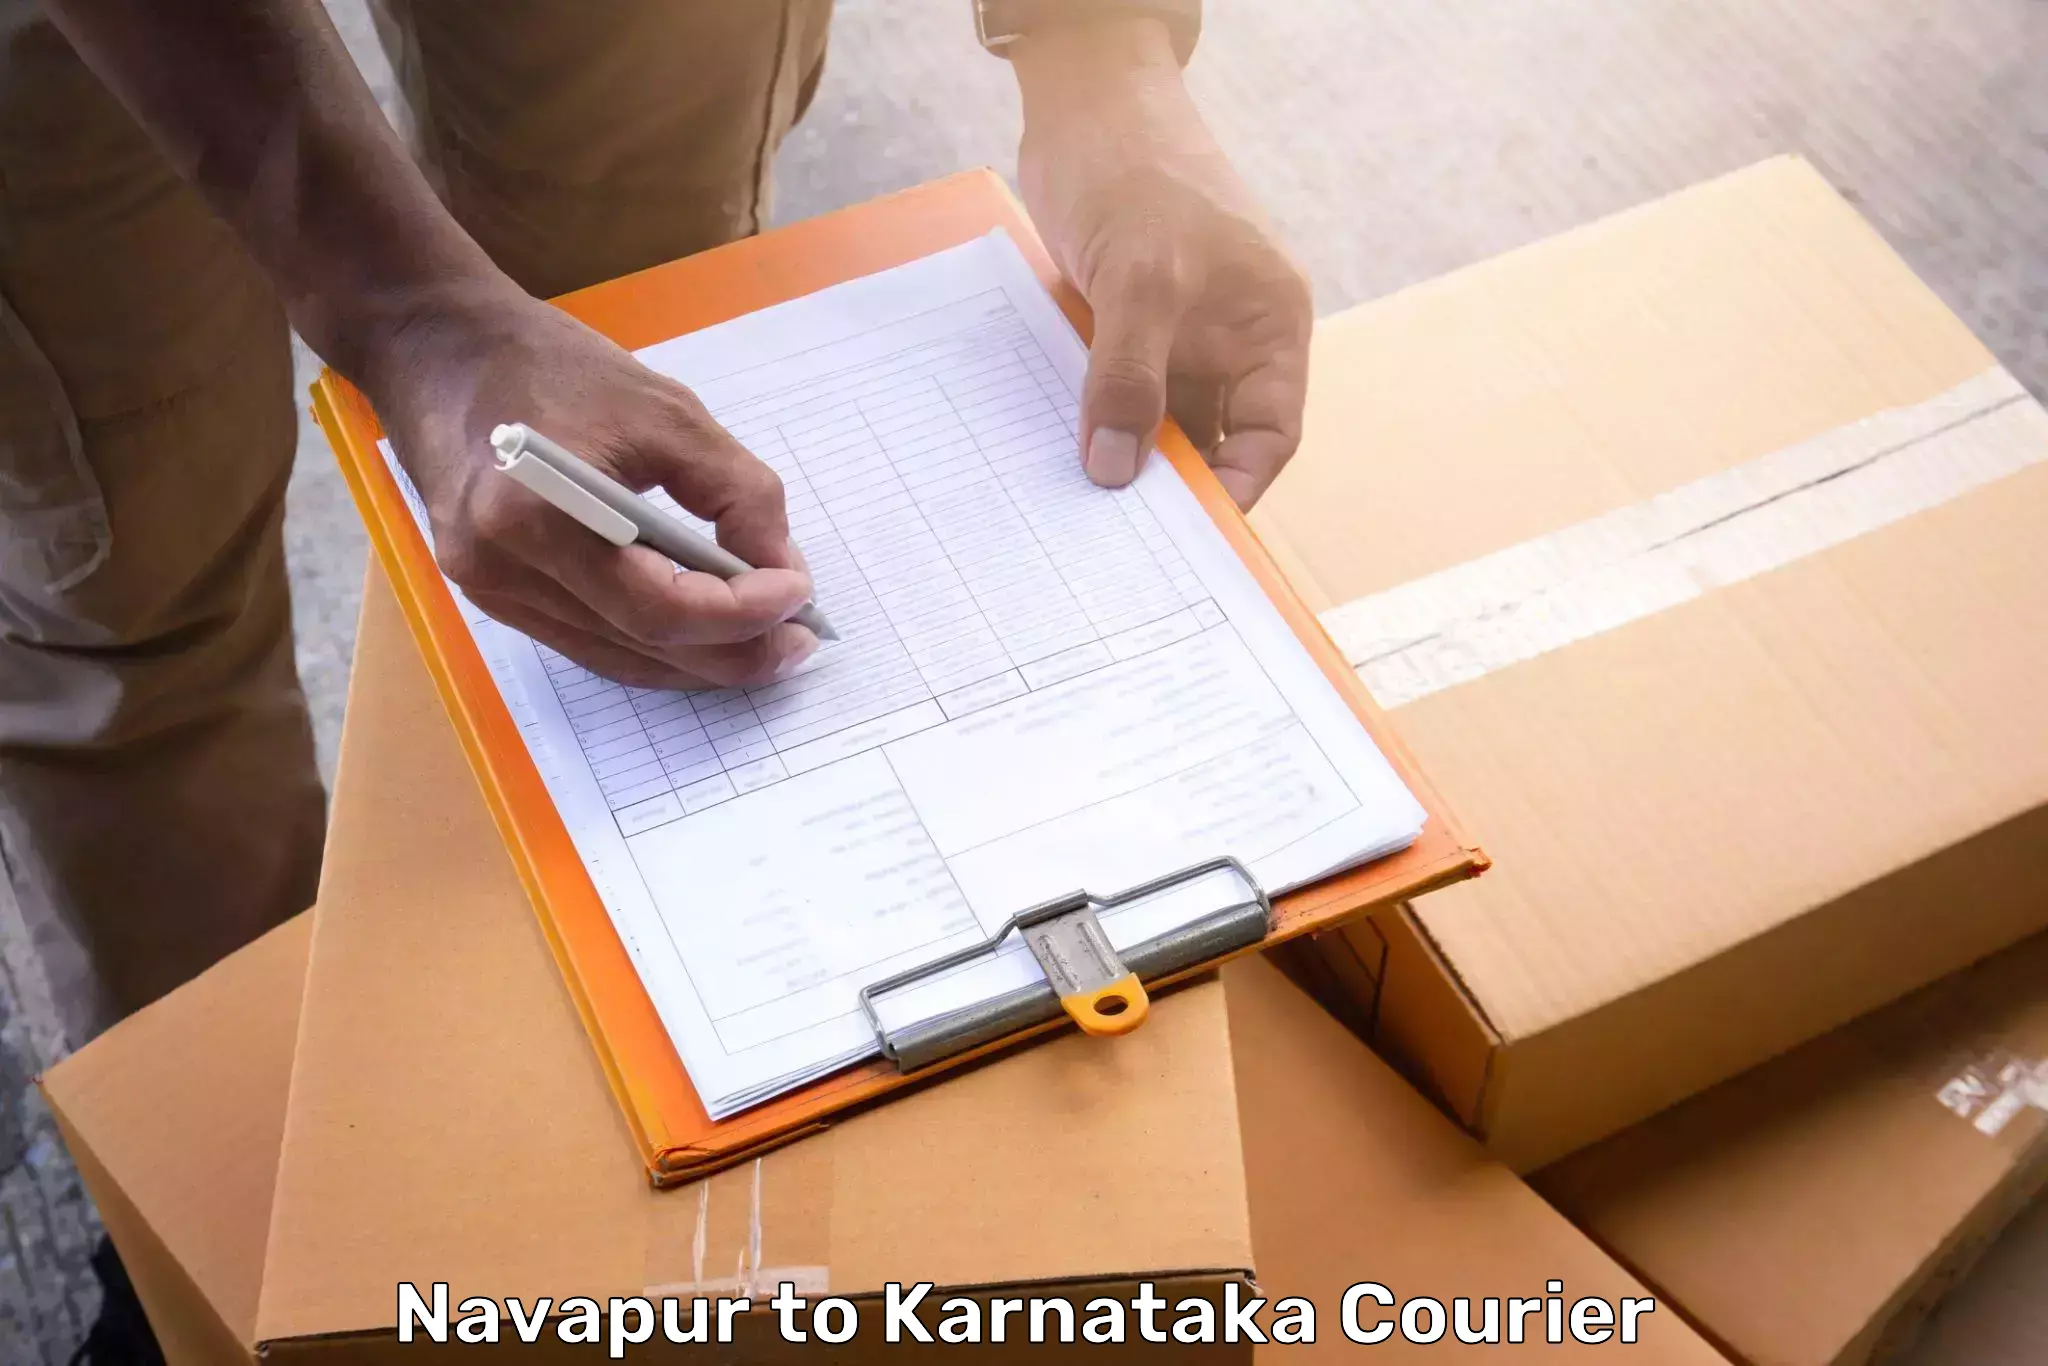 Urgent luggage shipment Navapur to Manipal Academy of Higher Education